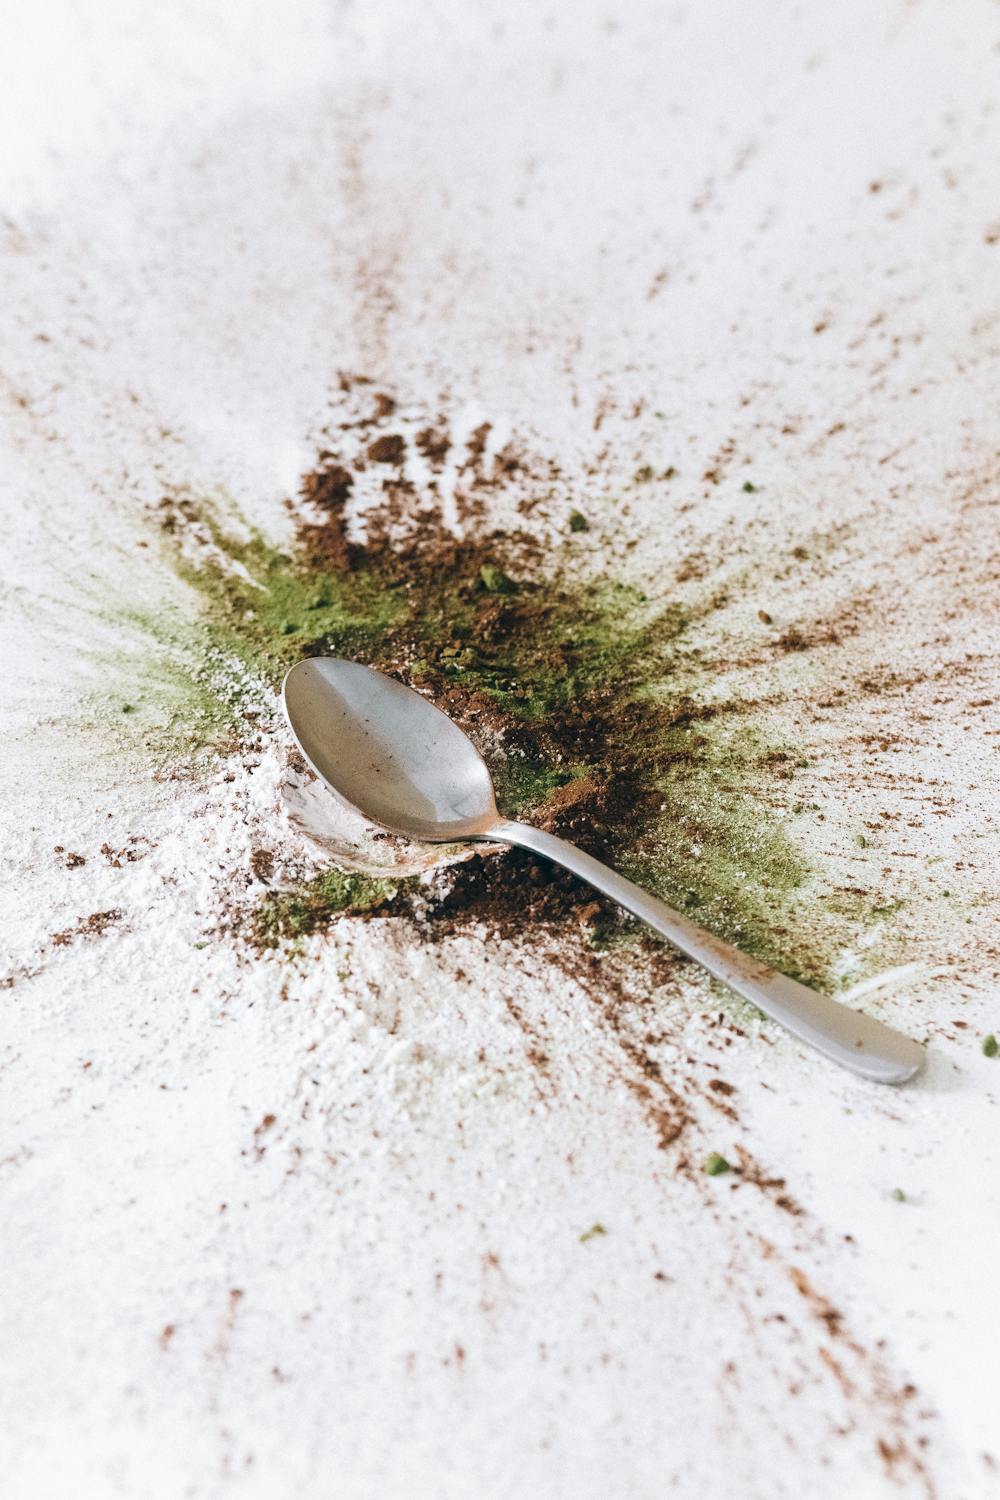 A silver spoon on white table. | Photo: Pexels